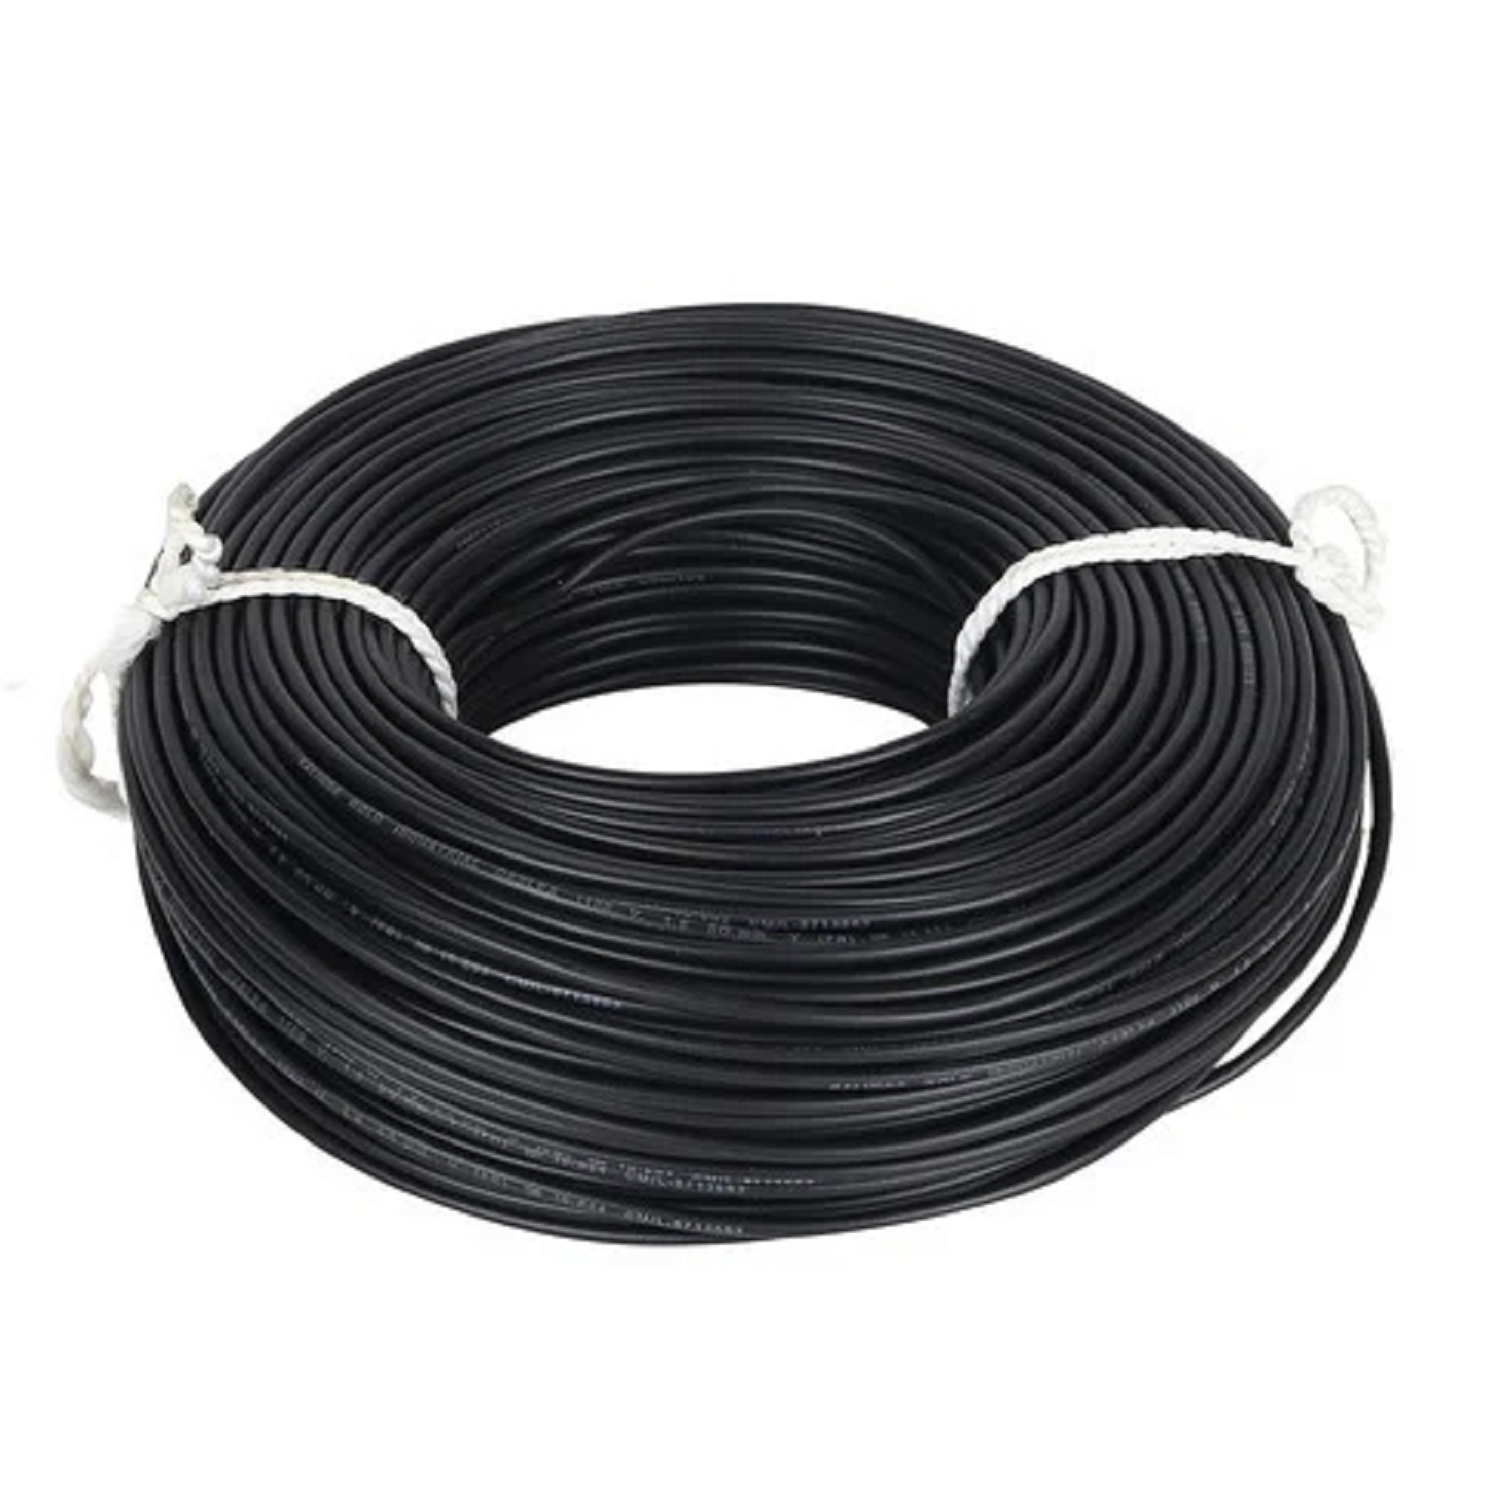 4.0 Sqmm KEI FR Single Core Copper Wire (180 Mtr) With PVC Insulated for Domestic 38 Industrial Uses